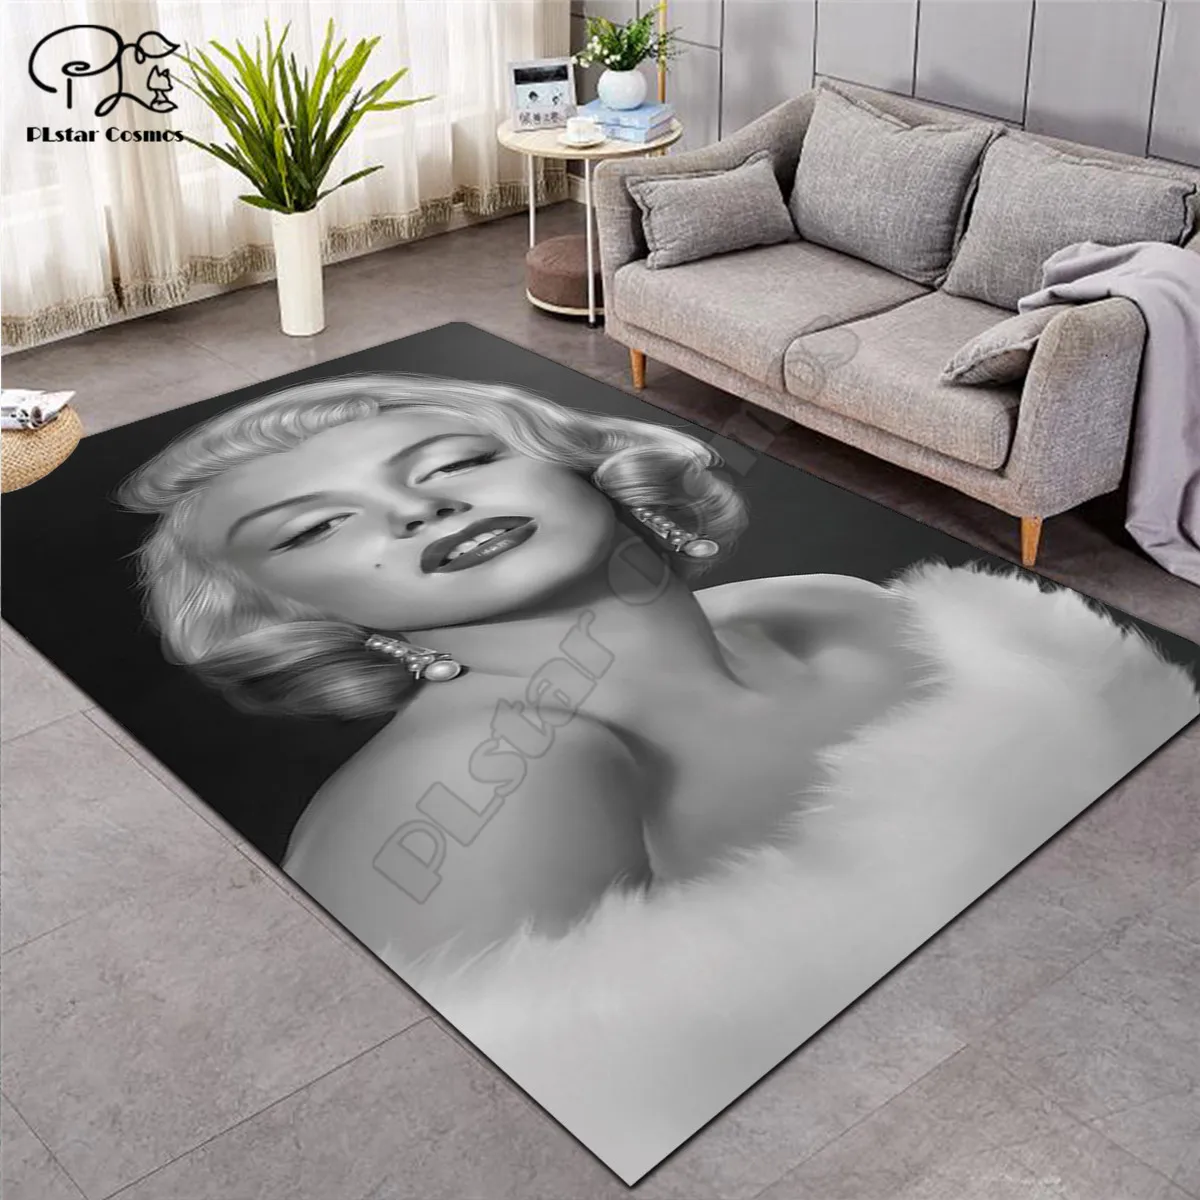 

Marilyn Monroe Carpets Soft Flannel 3D Printed Rugs Mat Rugs Anti-slip Large Rug Carpet Home Decoration style-4